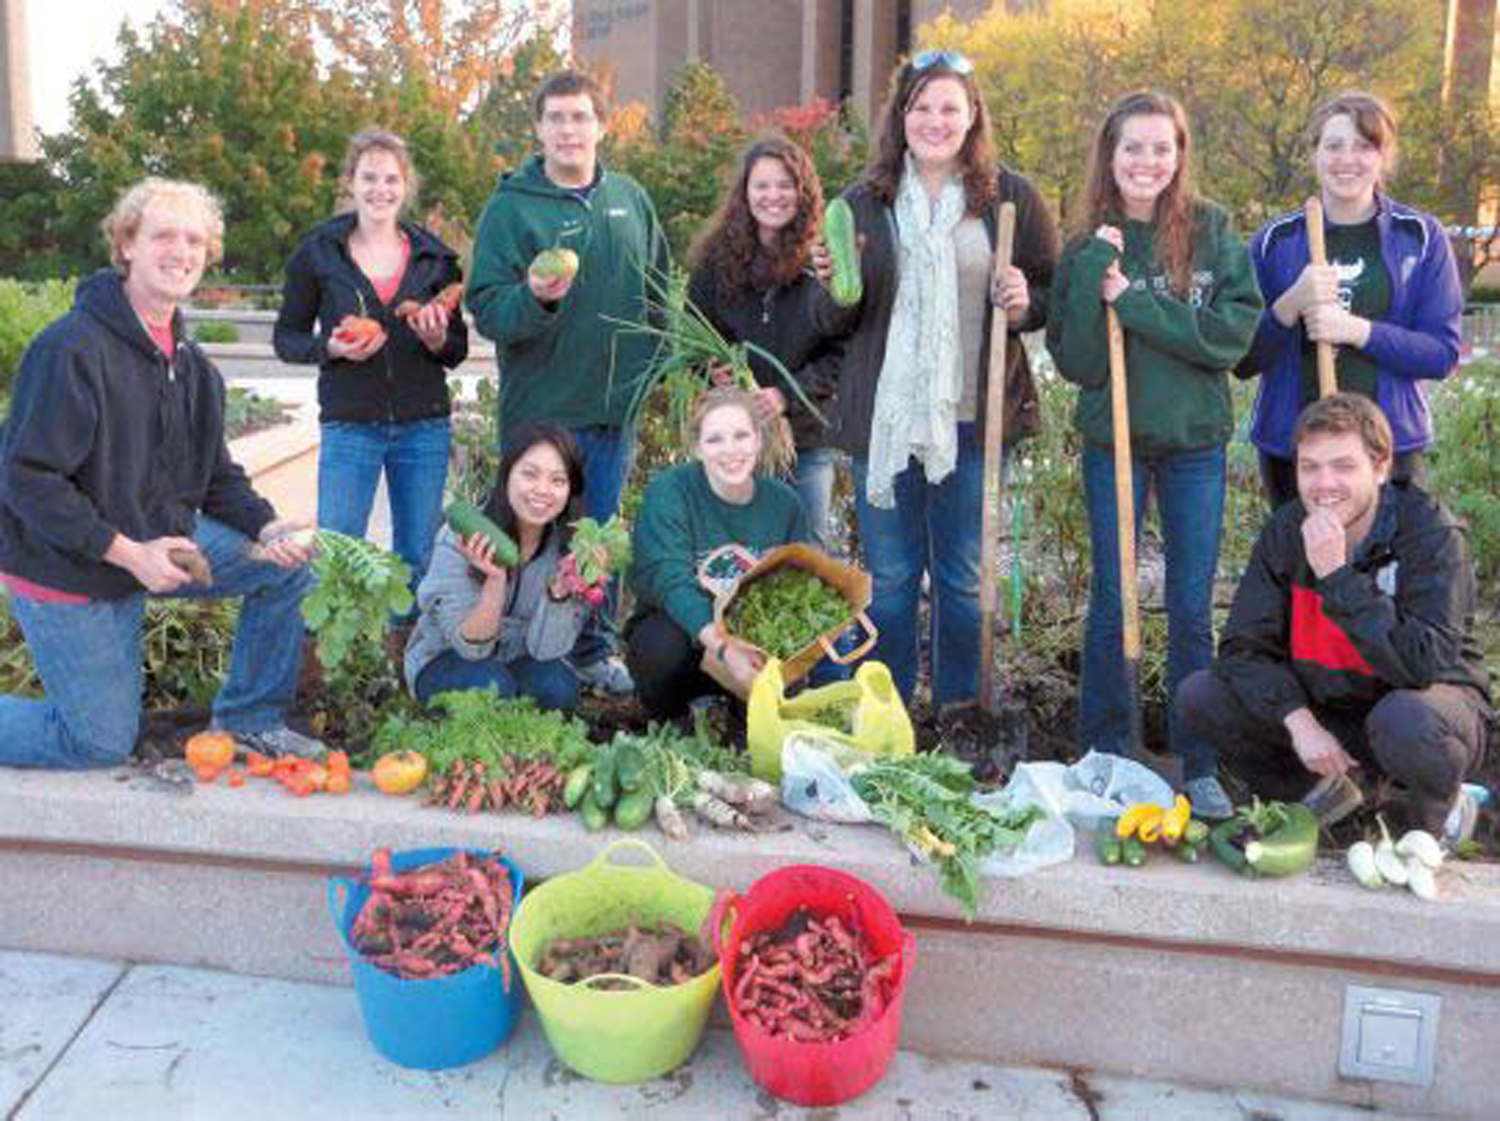 UW-Green Bay students with their harvest.